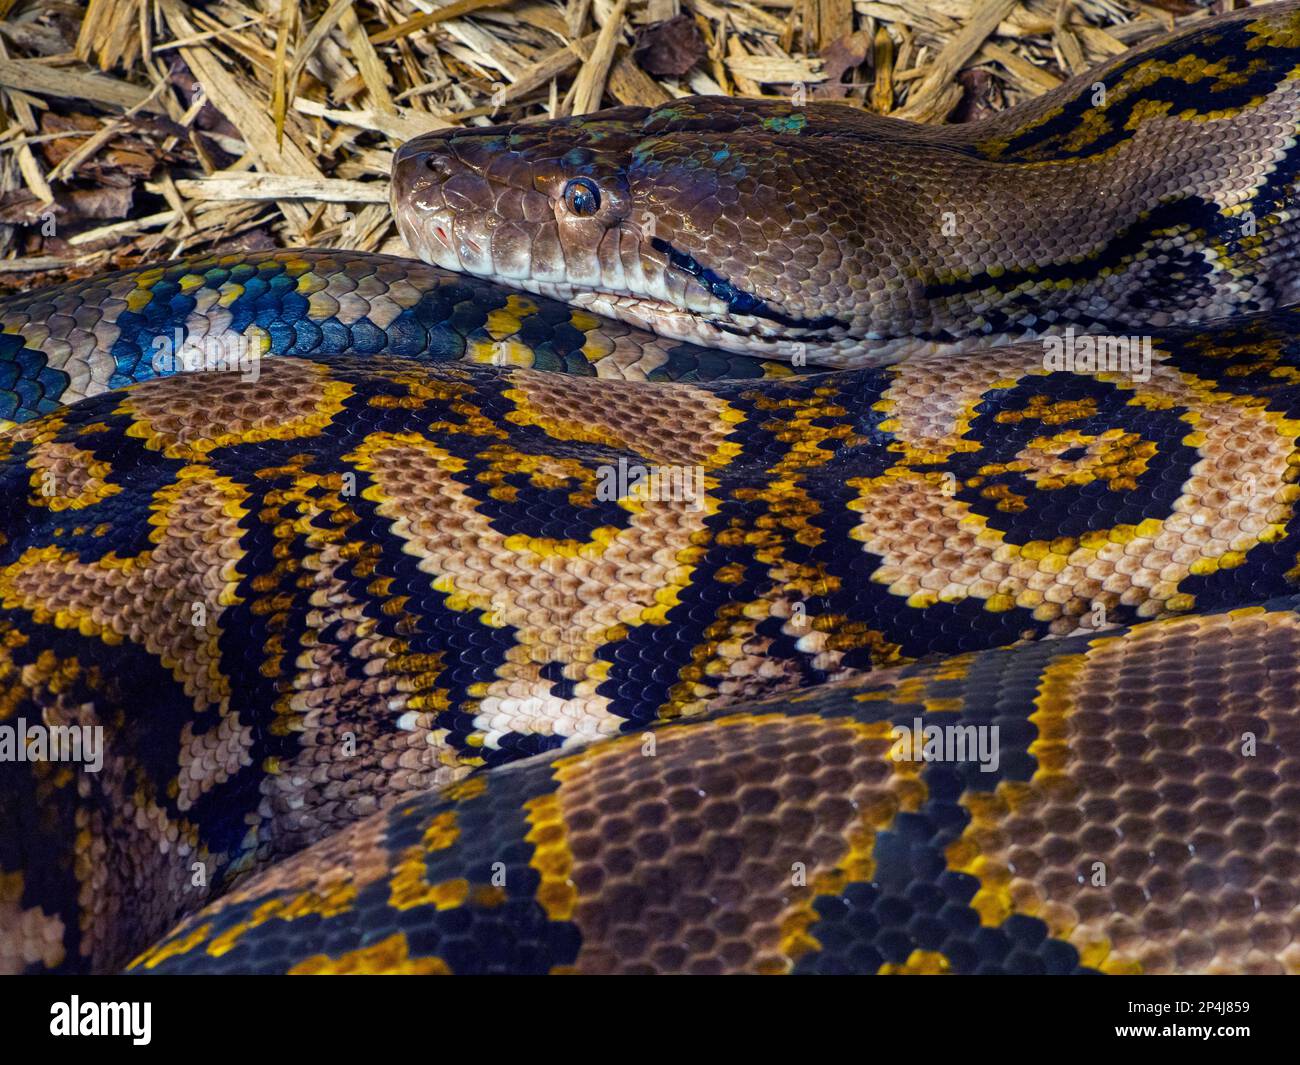 Reticulated python Python reticulatus close up of skin pattens Stock Photo